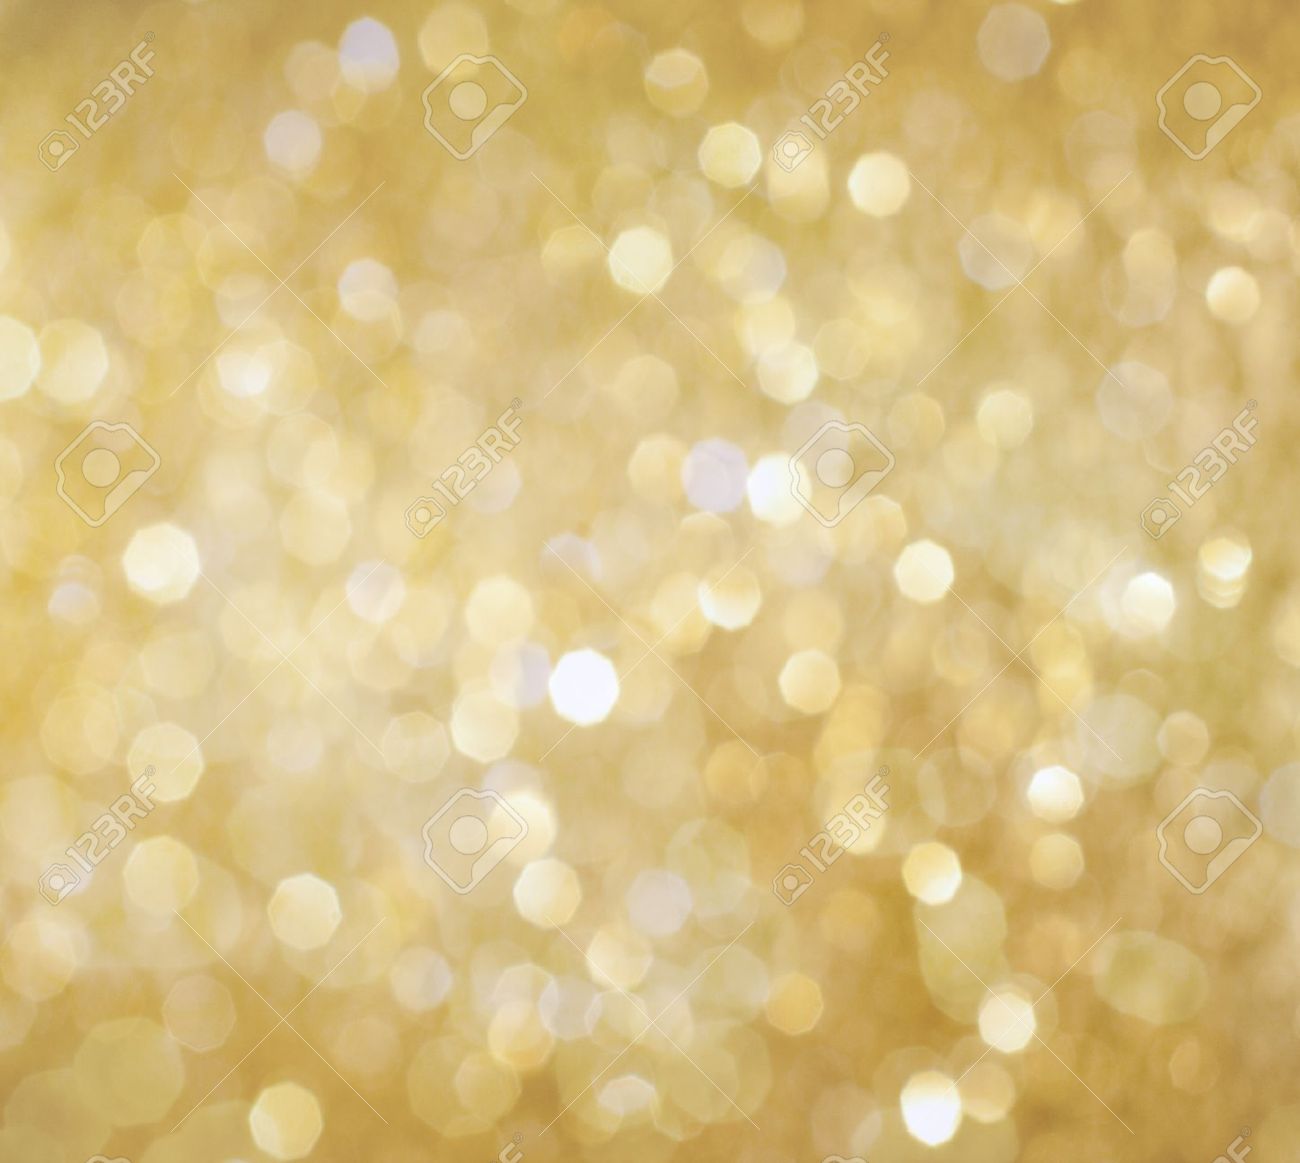 Light Gold Background Image The Art Mad Wallpaper